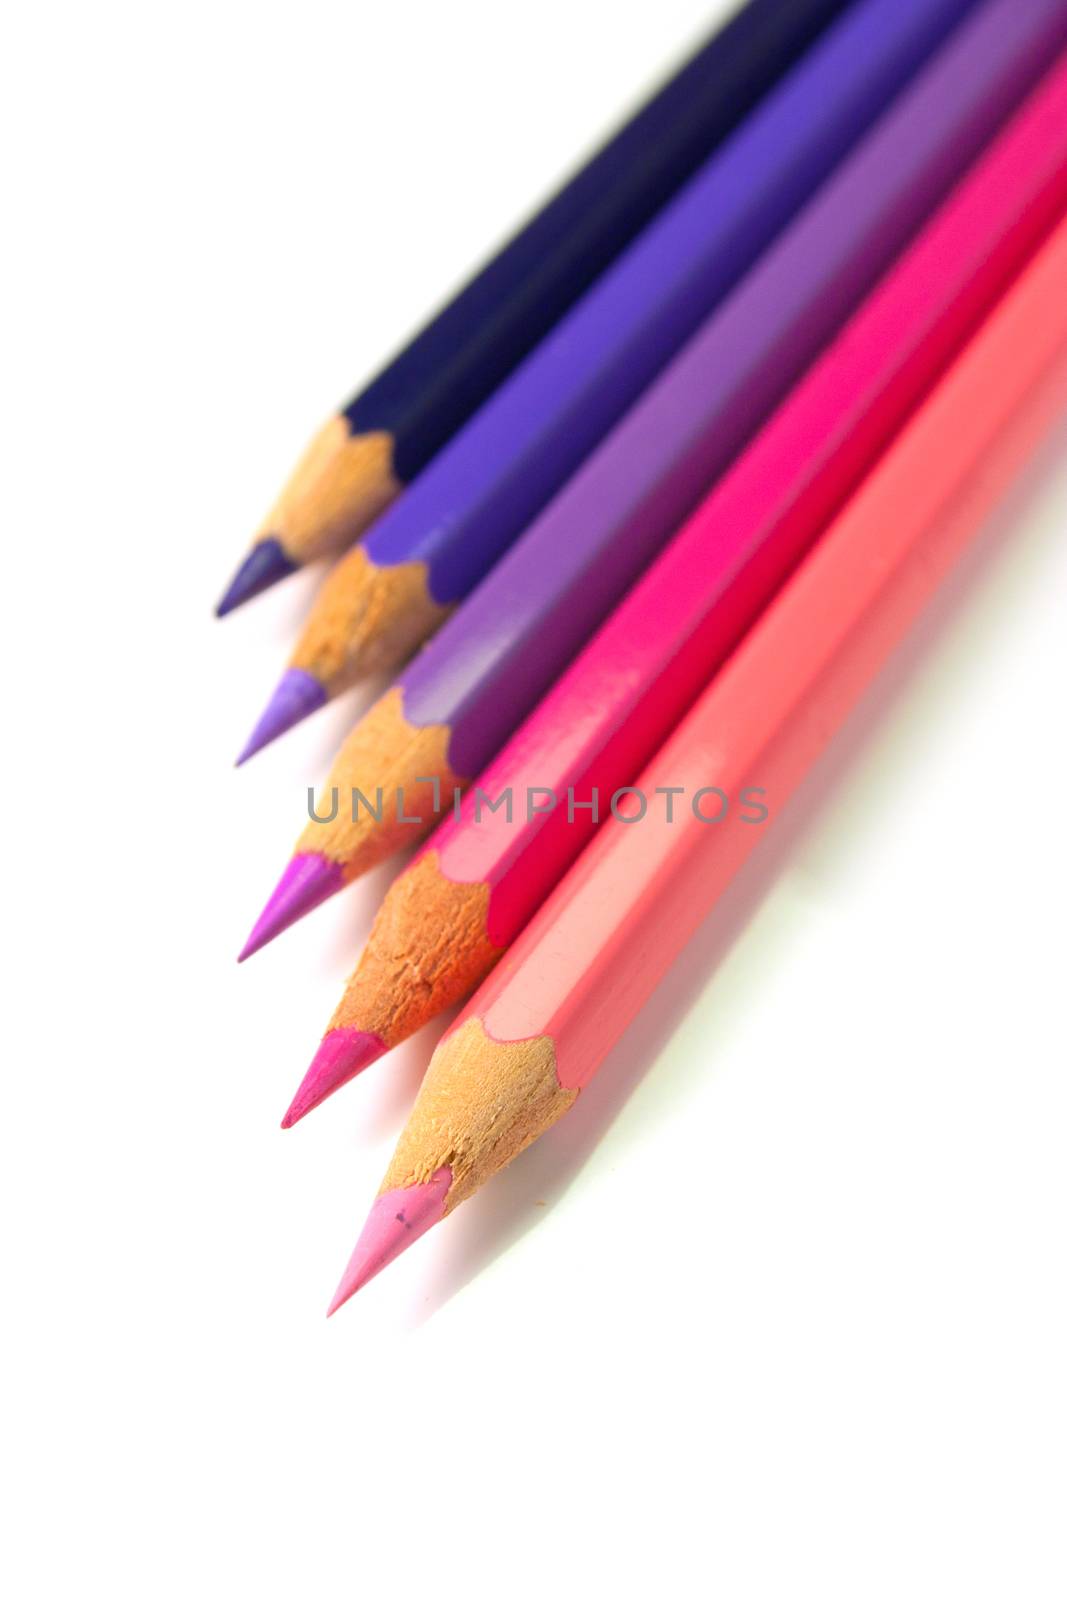 An assortment of purple color pencils on white background